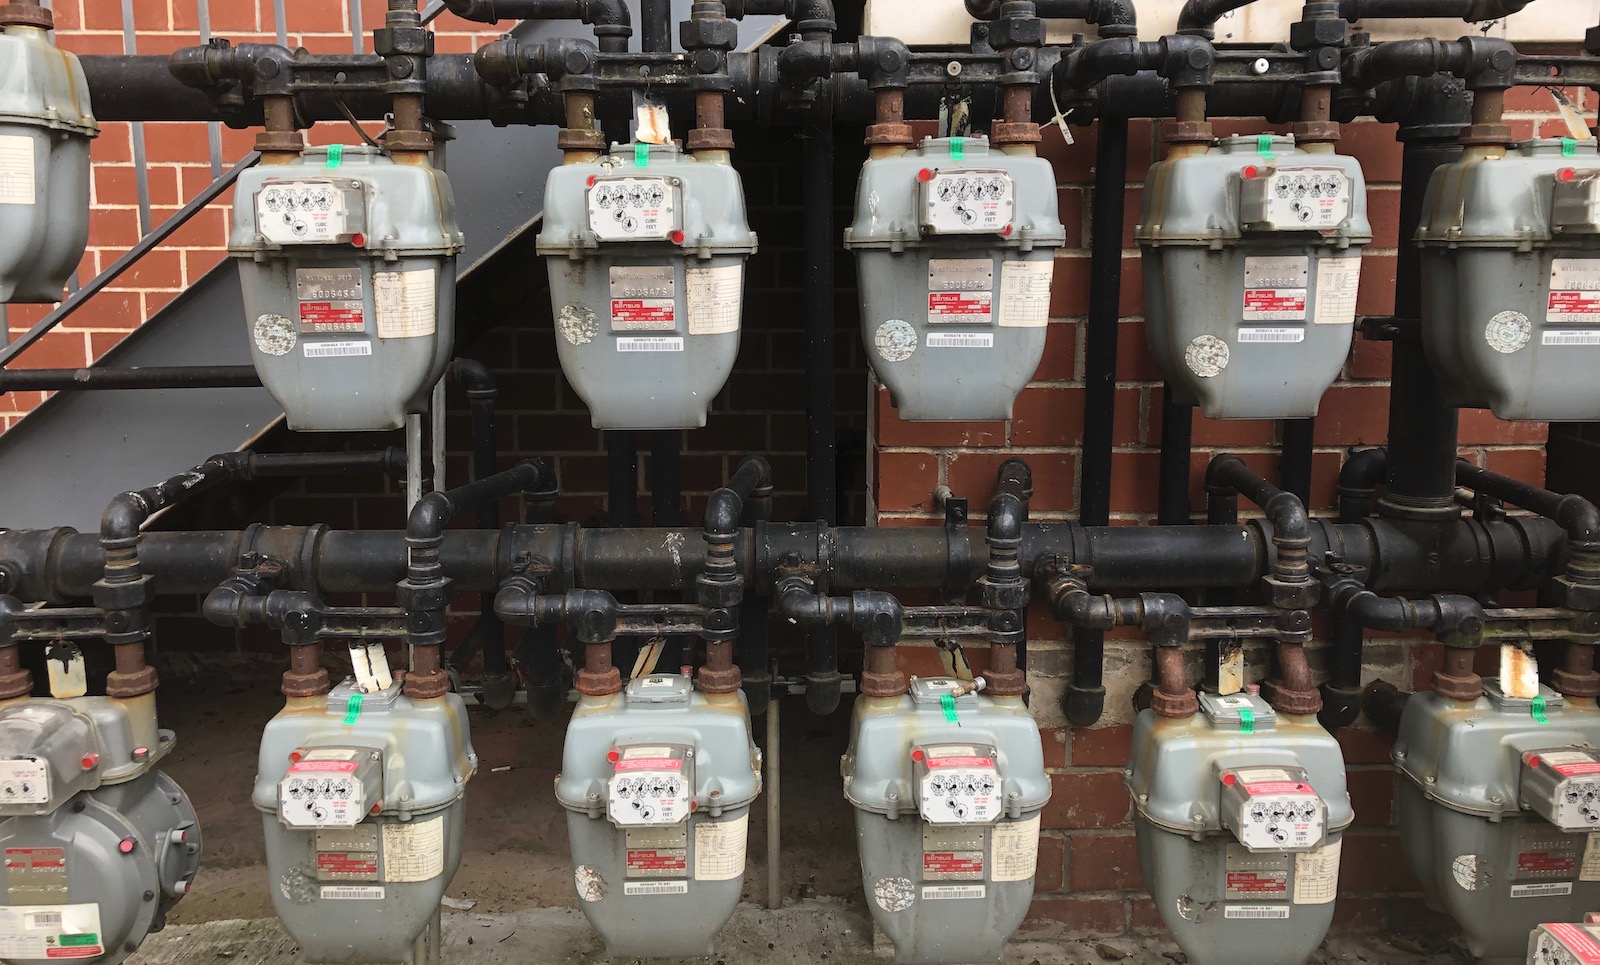 a line of gas meters outside a building